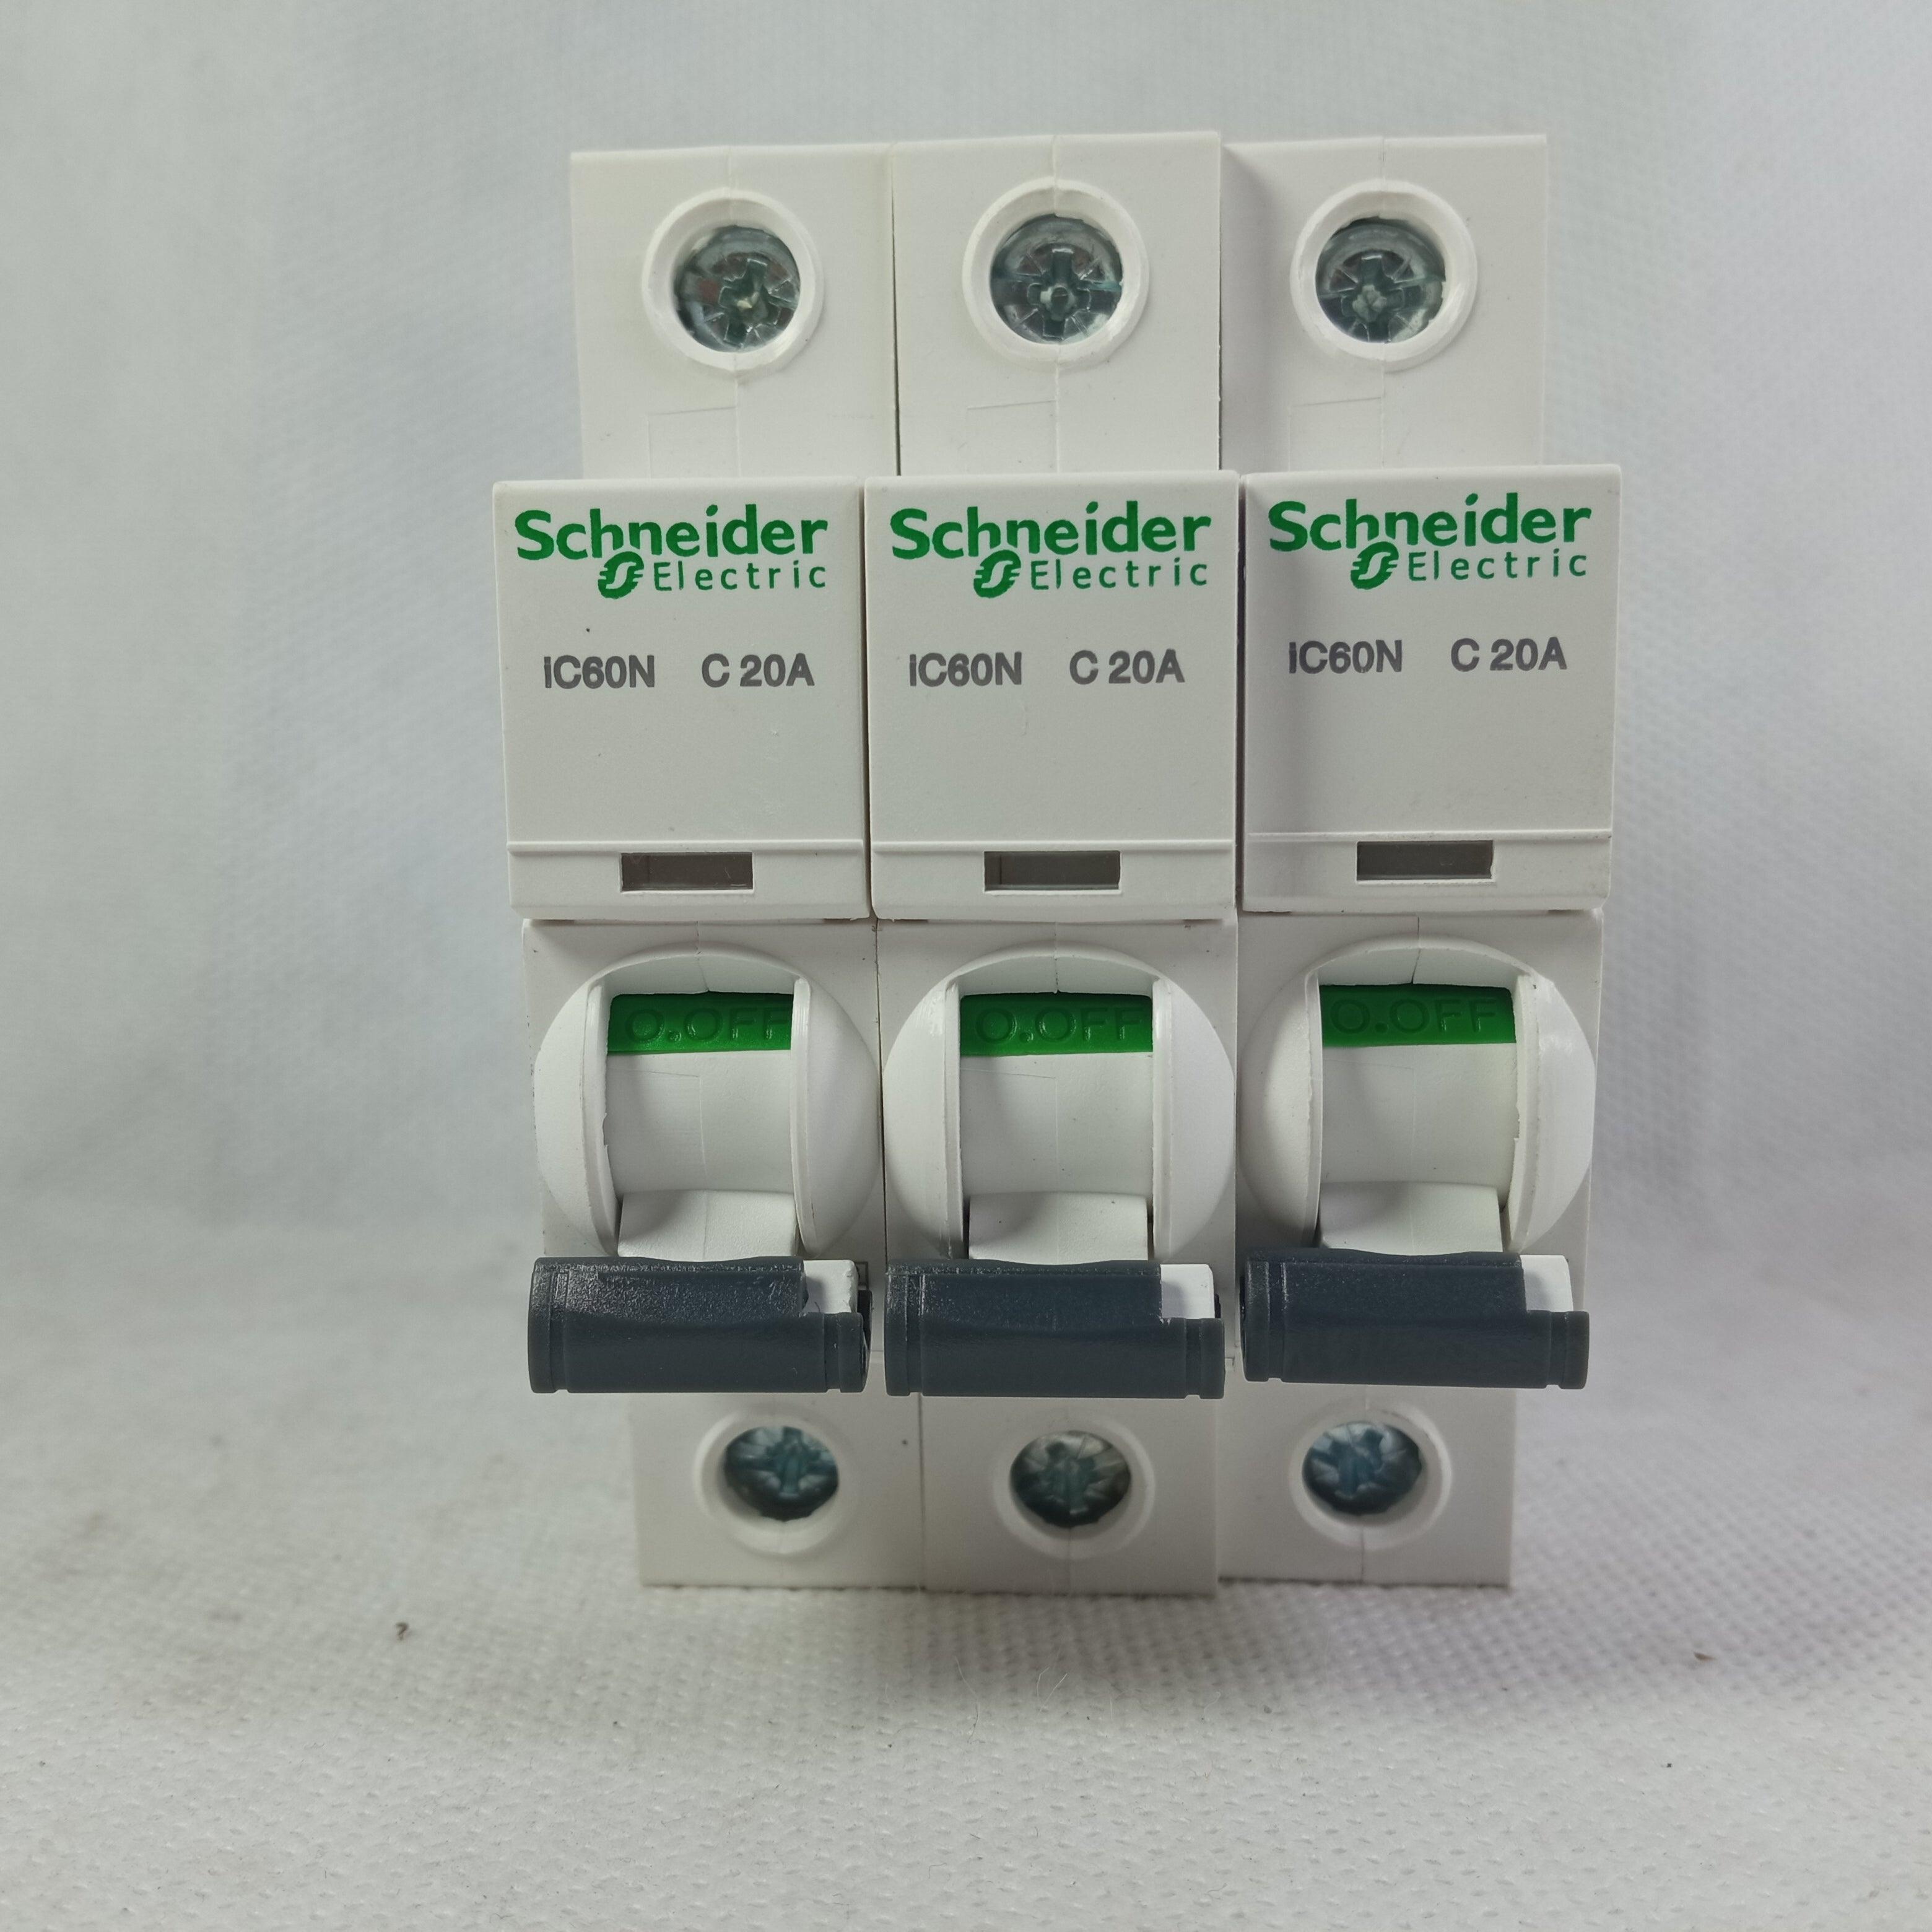 Schneider MCB AC Circuit Breakers China Made in Pakistan